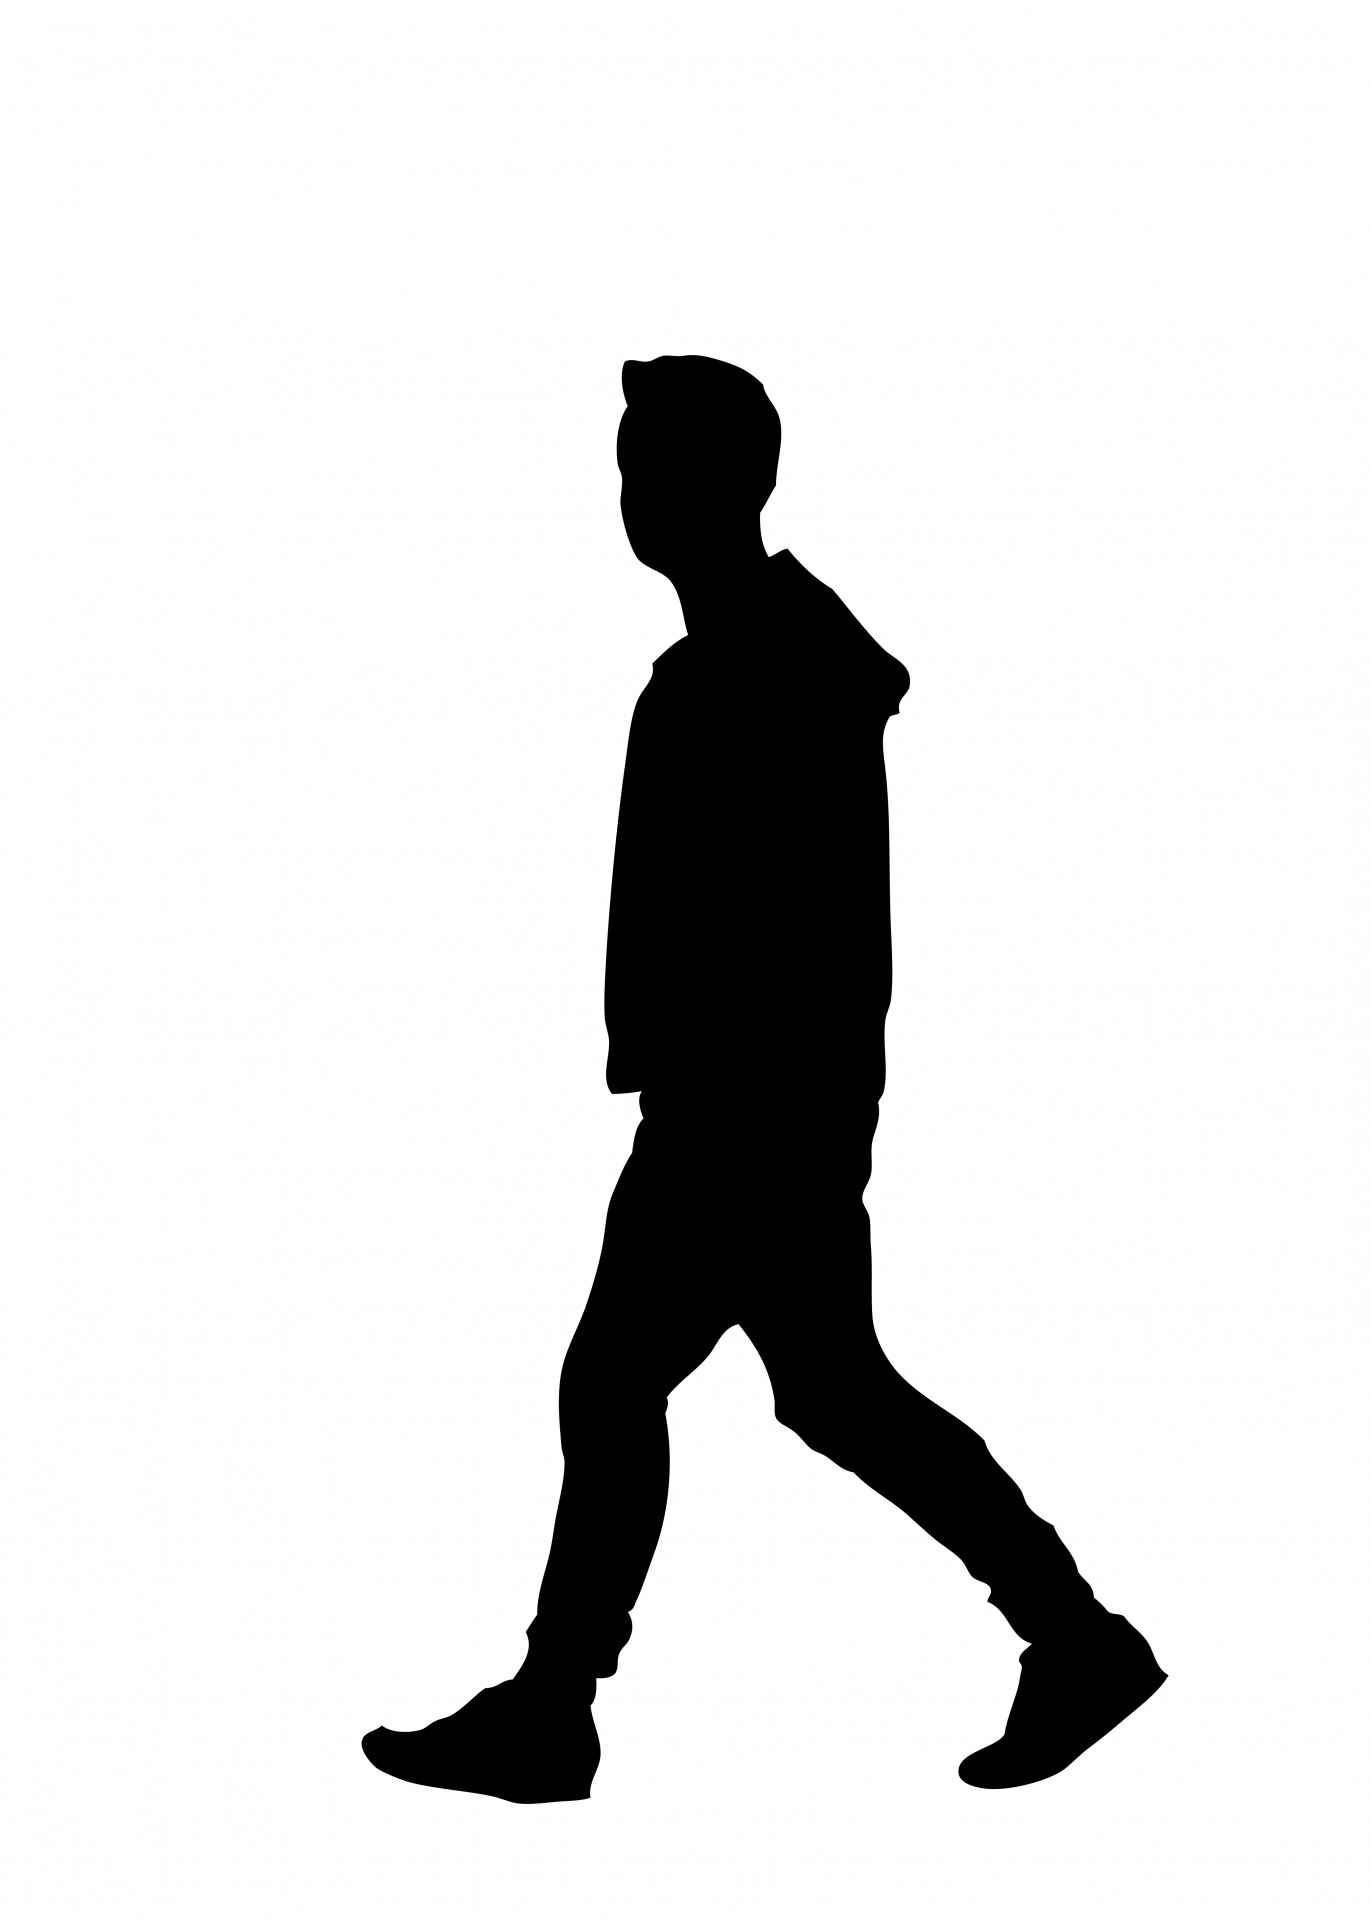 People walking clipart black and white